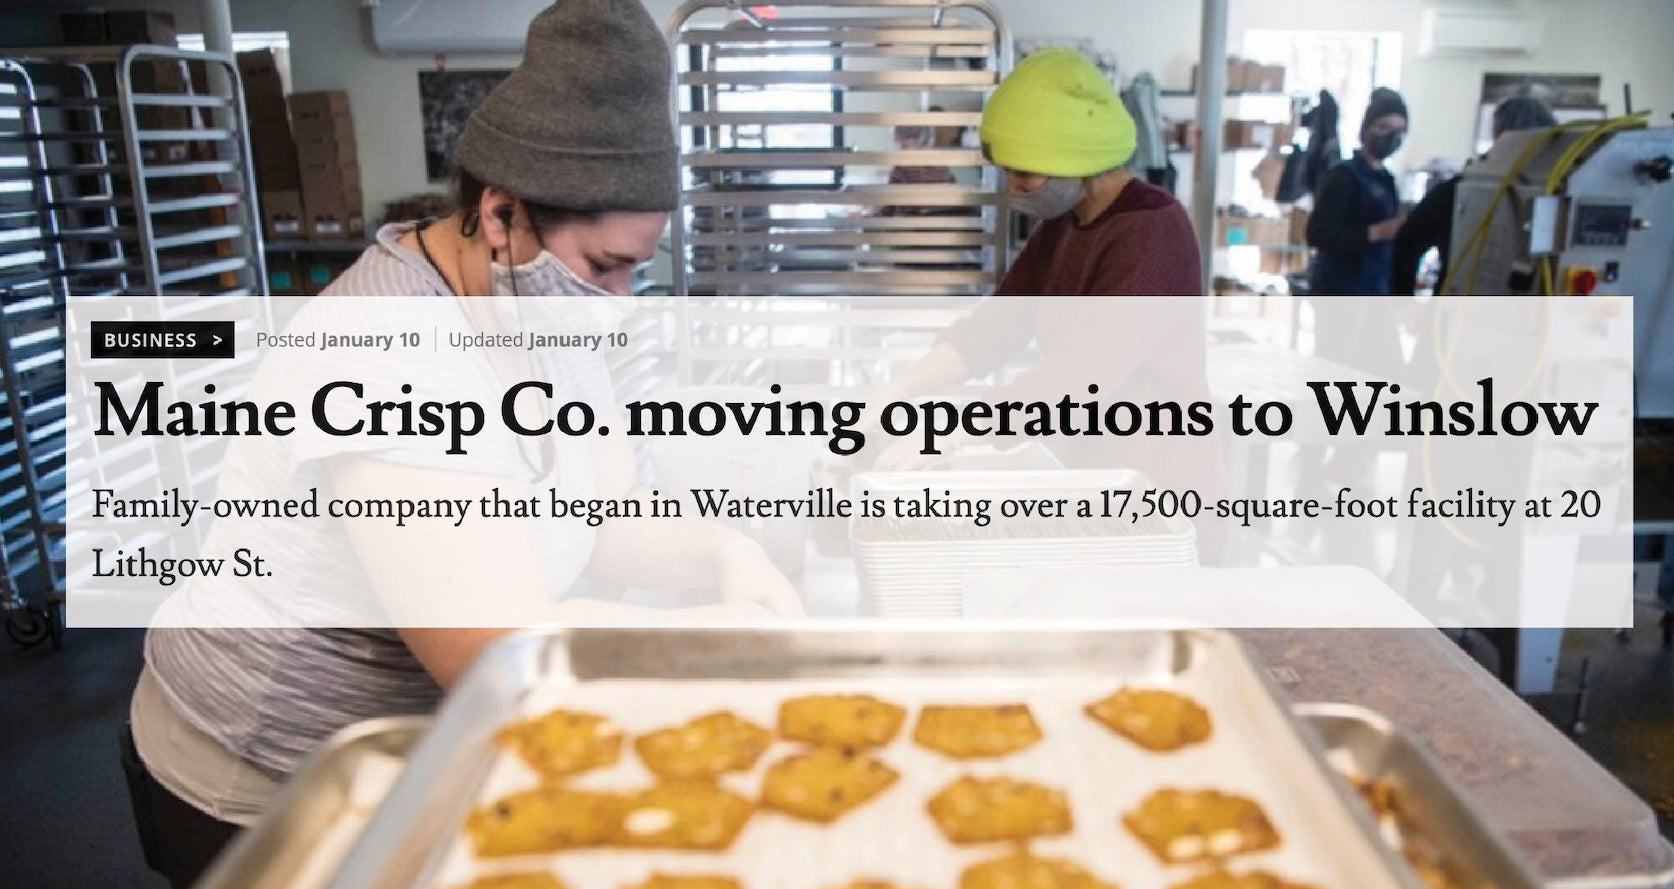 Maine Crisp Co. Moving Operations to Winslow